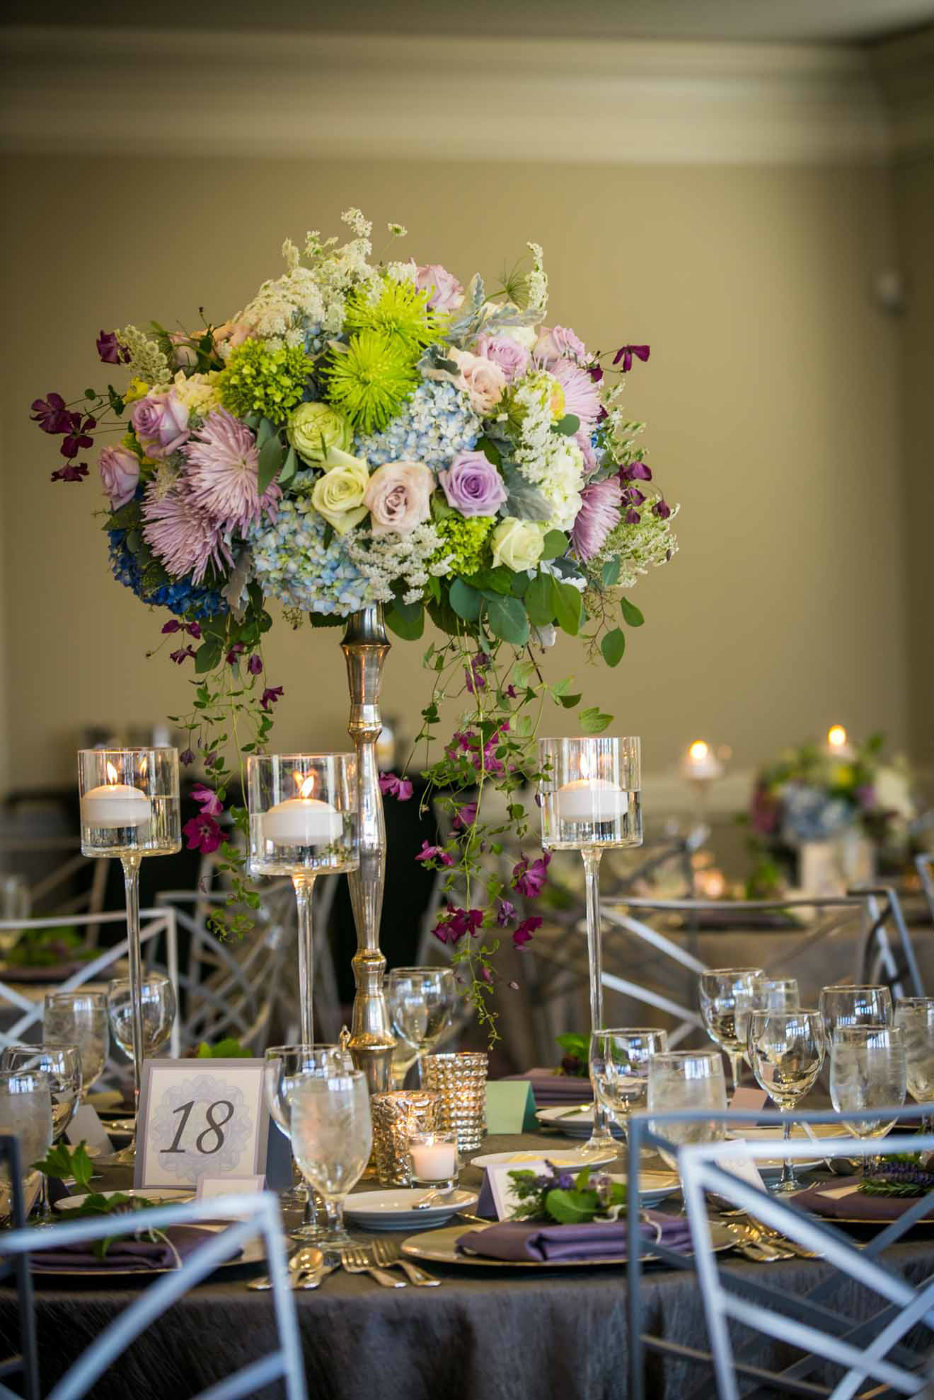 large centerpiece of blue hydrangea, purple roses, green chrysanthemums, , and trailing purple clematis, with floating glass candle holders